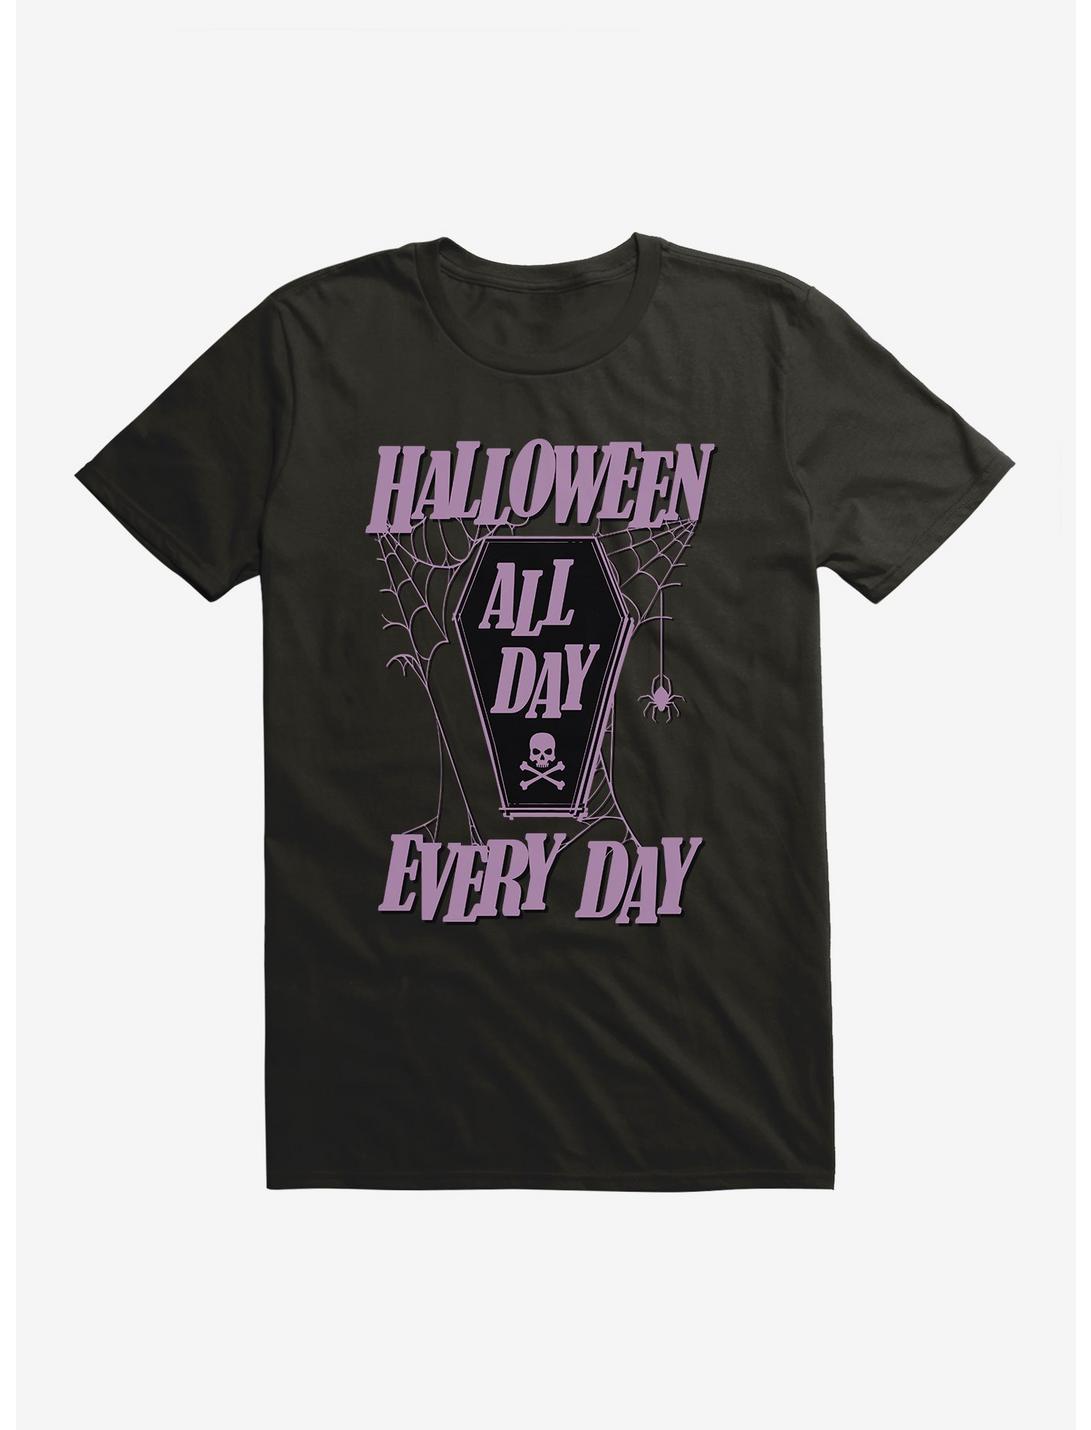 All Day Every Day T-Shirt, , hi-res